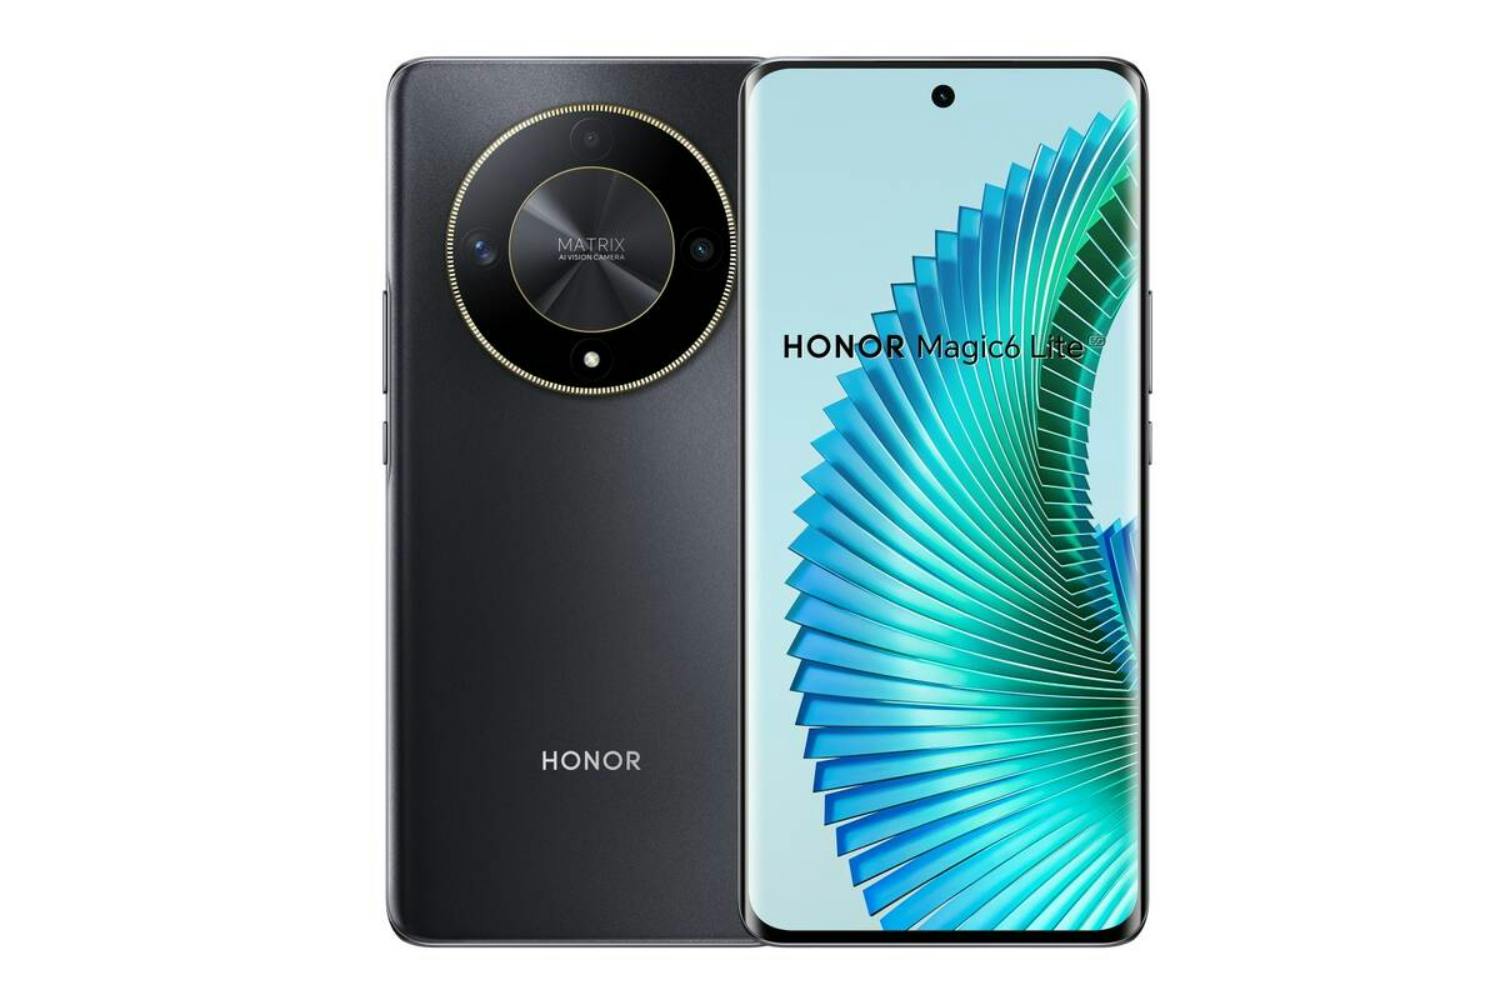 Honor confirms Magic Lite 6 is coming to Ireland in February 